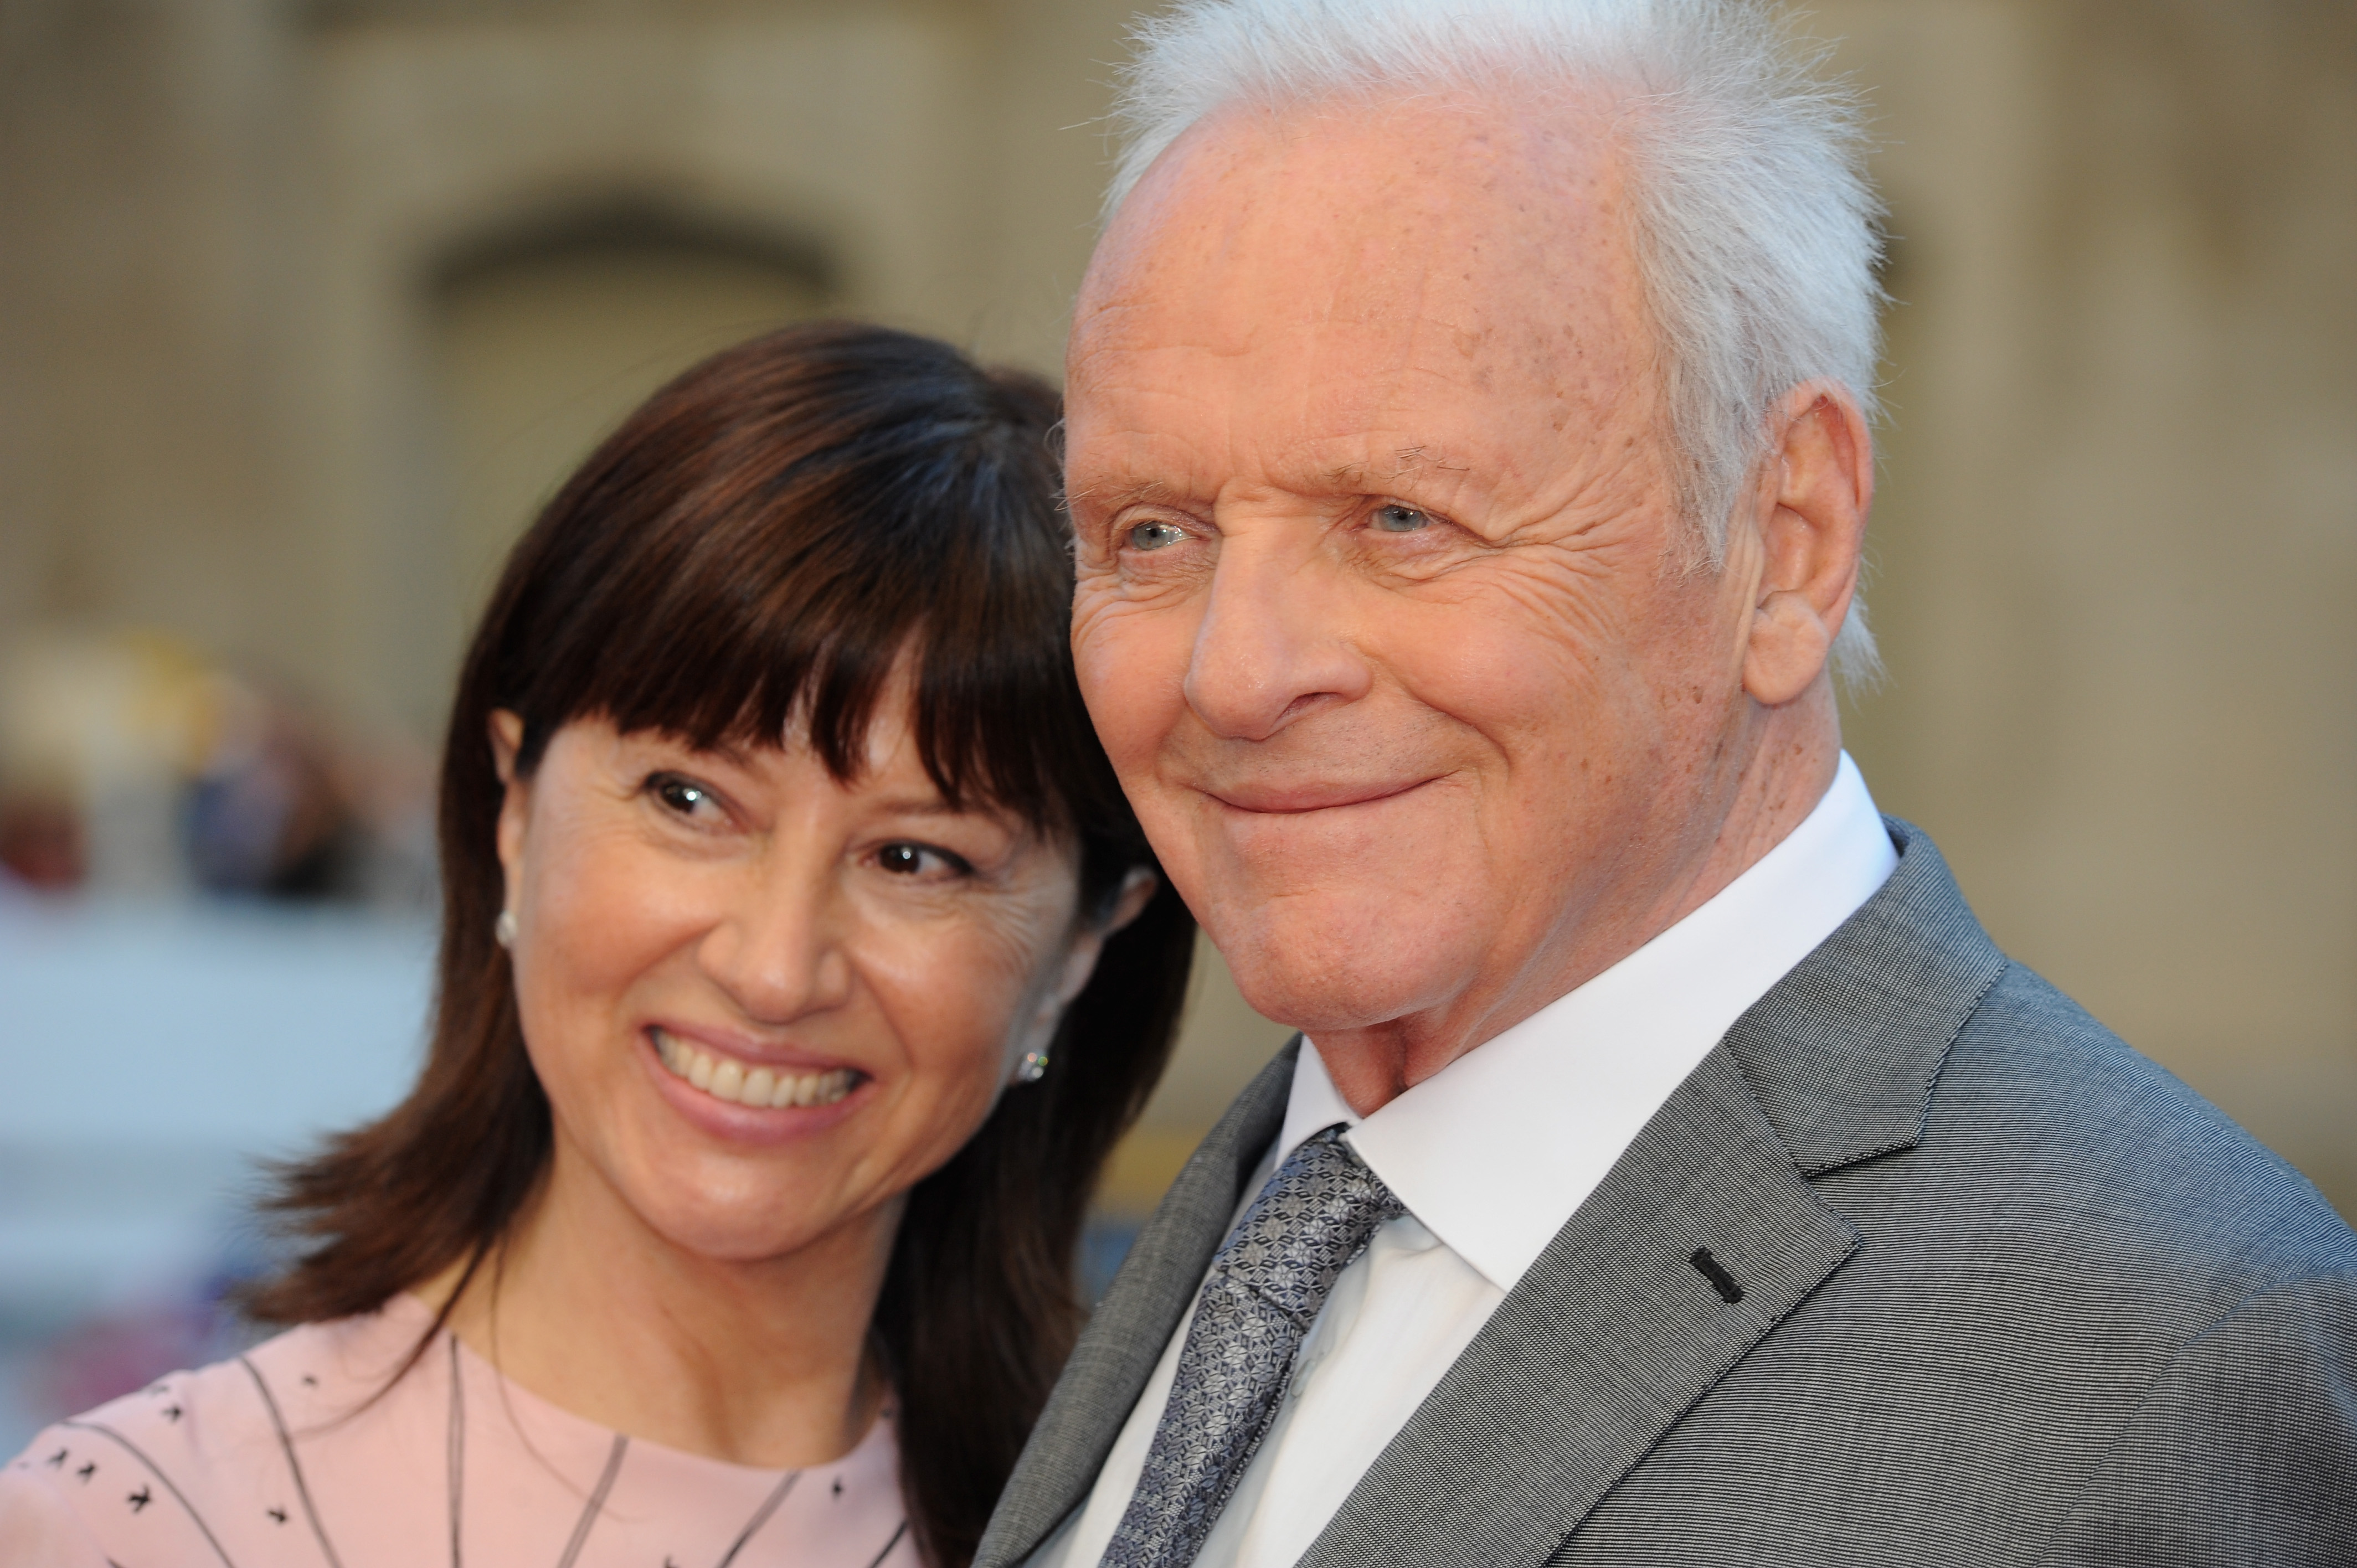 Stella Arroyave and Sir Anthony Hopkins attend the US premiere of "Transformers: The Last Knight" at the Civic Opera House in Chicago, Illinois, on June 20, 2017. | Source: Getty Images